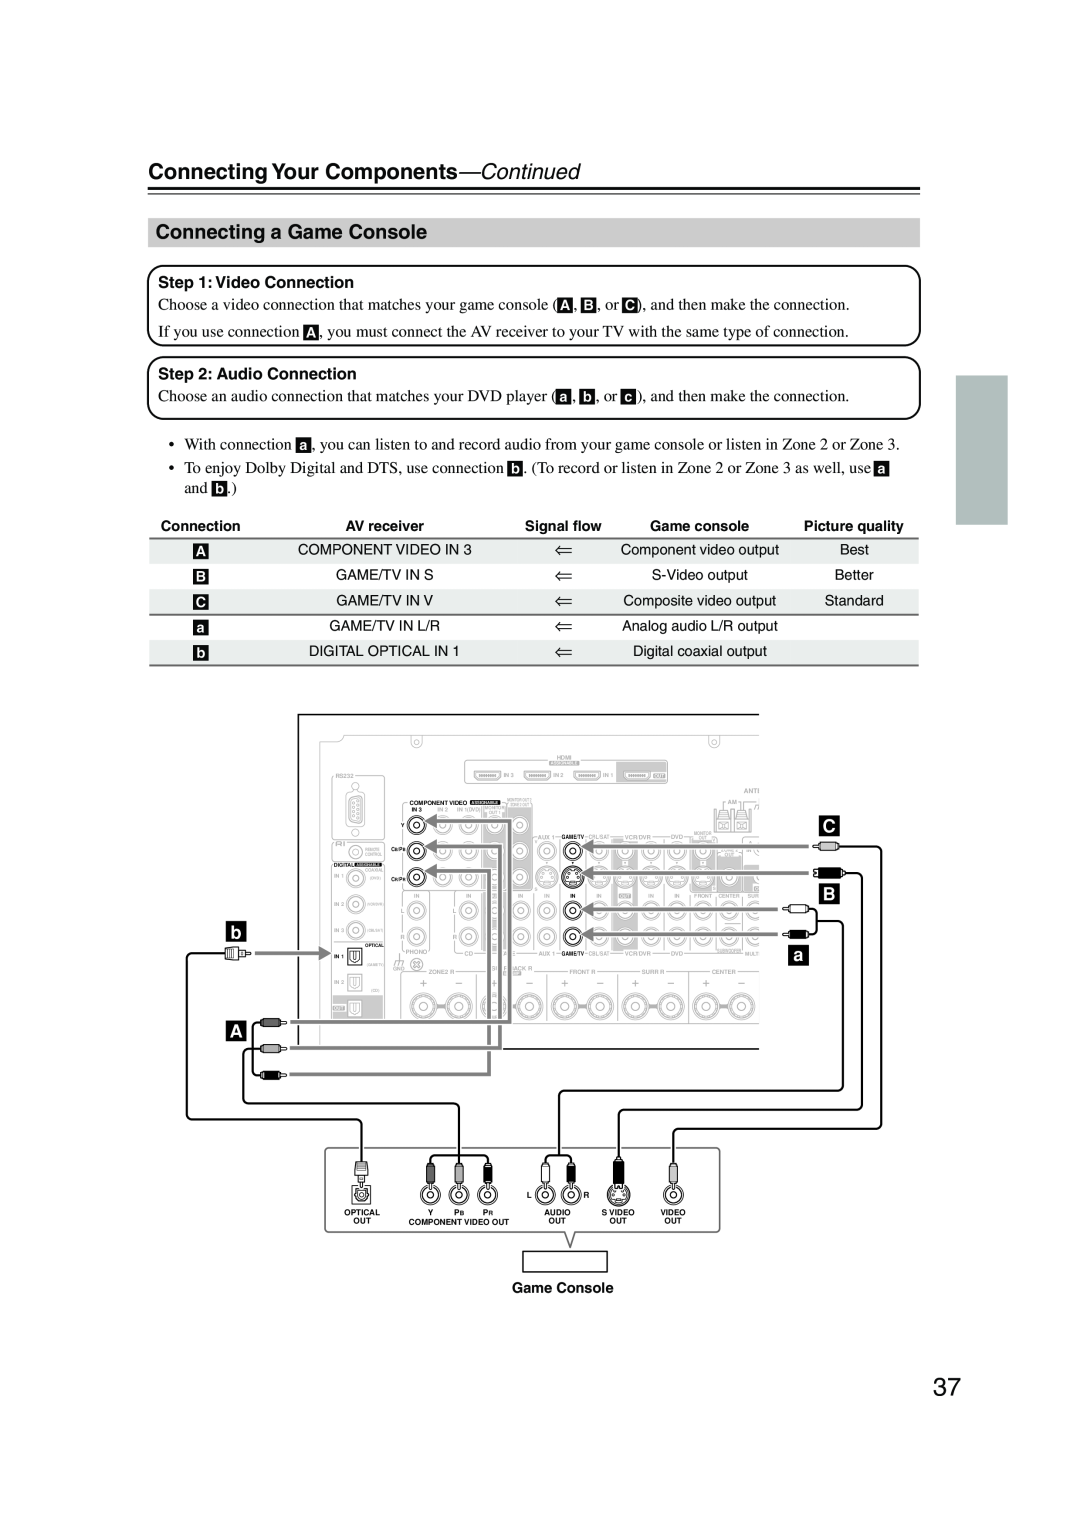 Integra DTR-7.8 instruction manual Connecting a Game Console, Connecting Your Components—Continued 